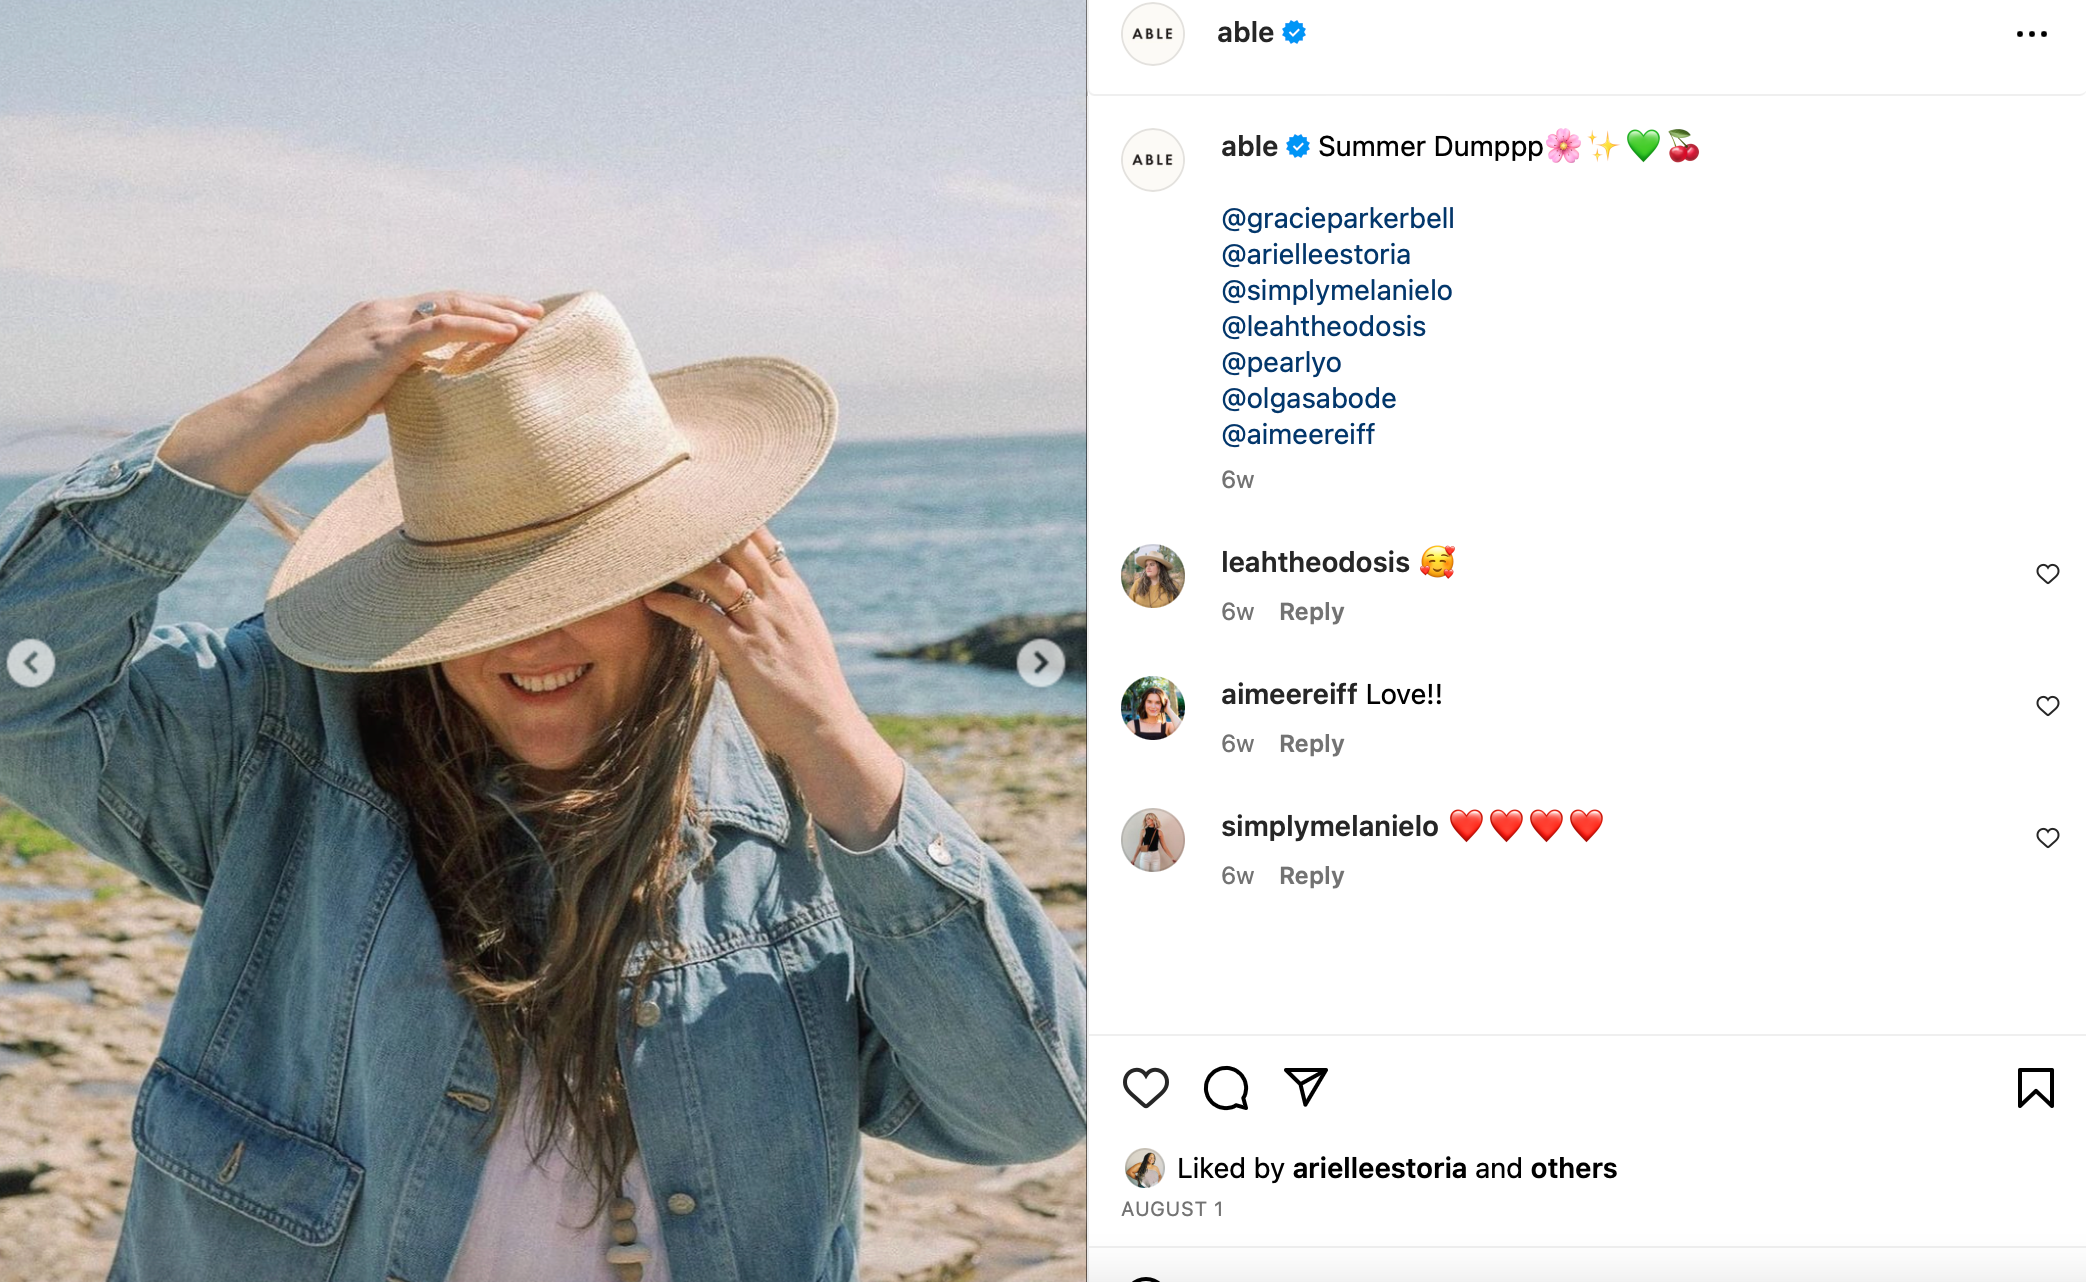 Here you can see how the clothing and accessories brand Able has reposted posts they've been tagged in by users on their social media accounts.